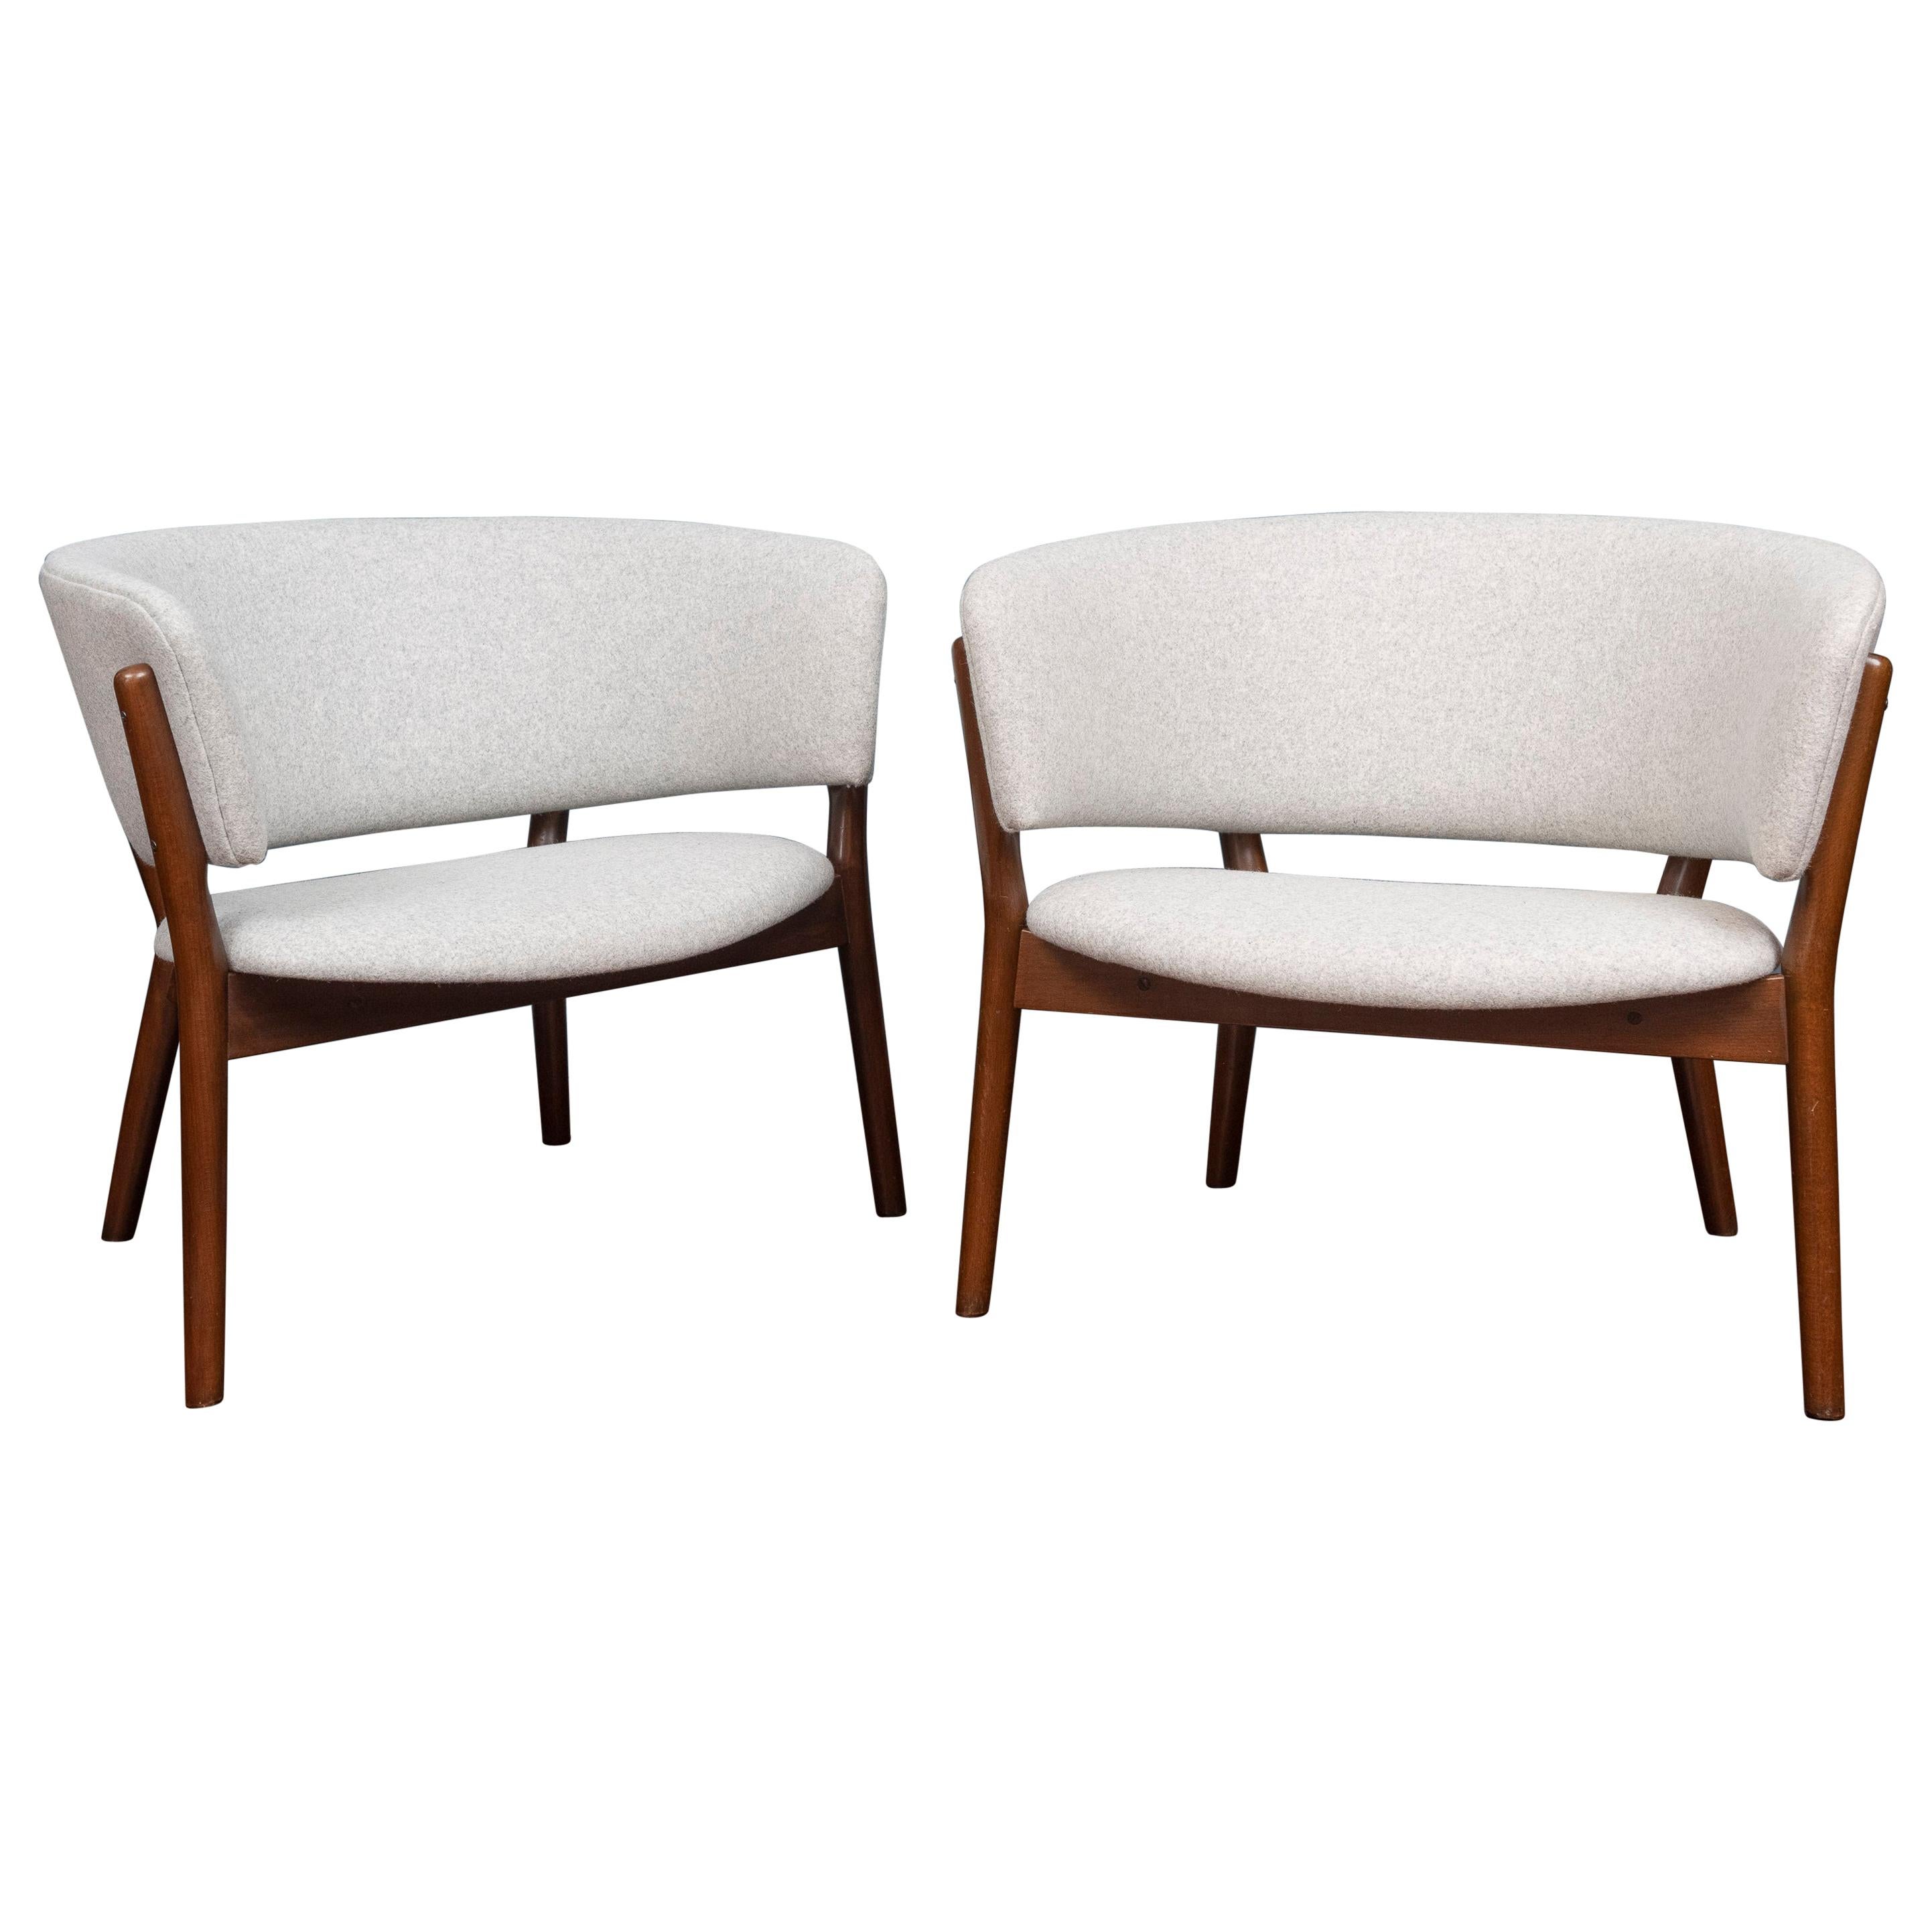 Pair of Nanna Ditzel Lounge Chairs